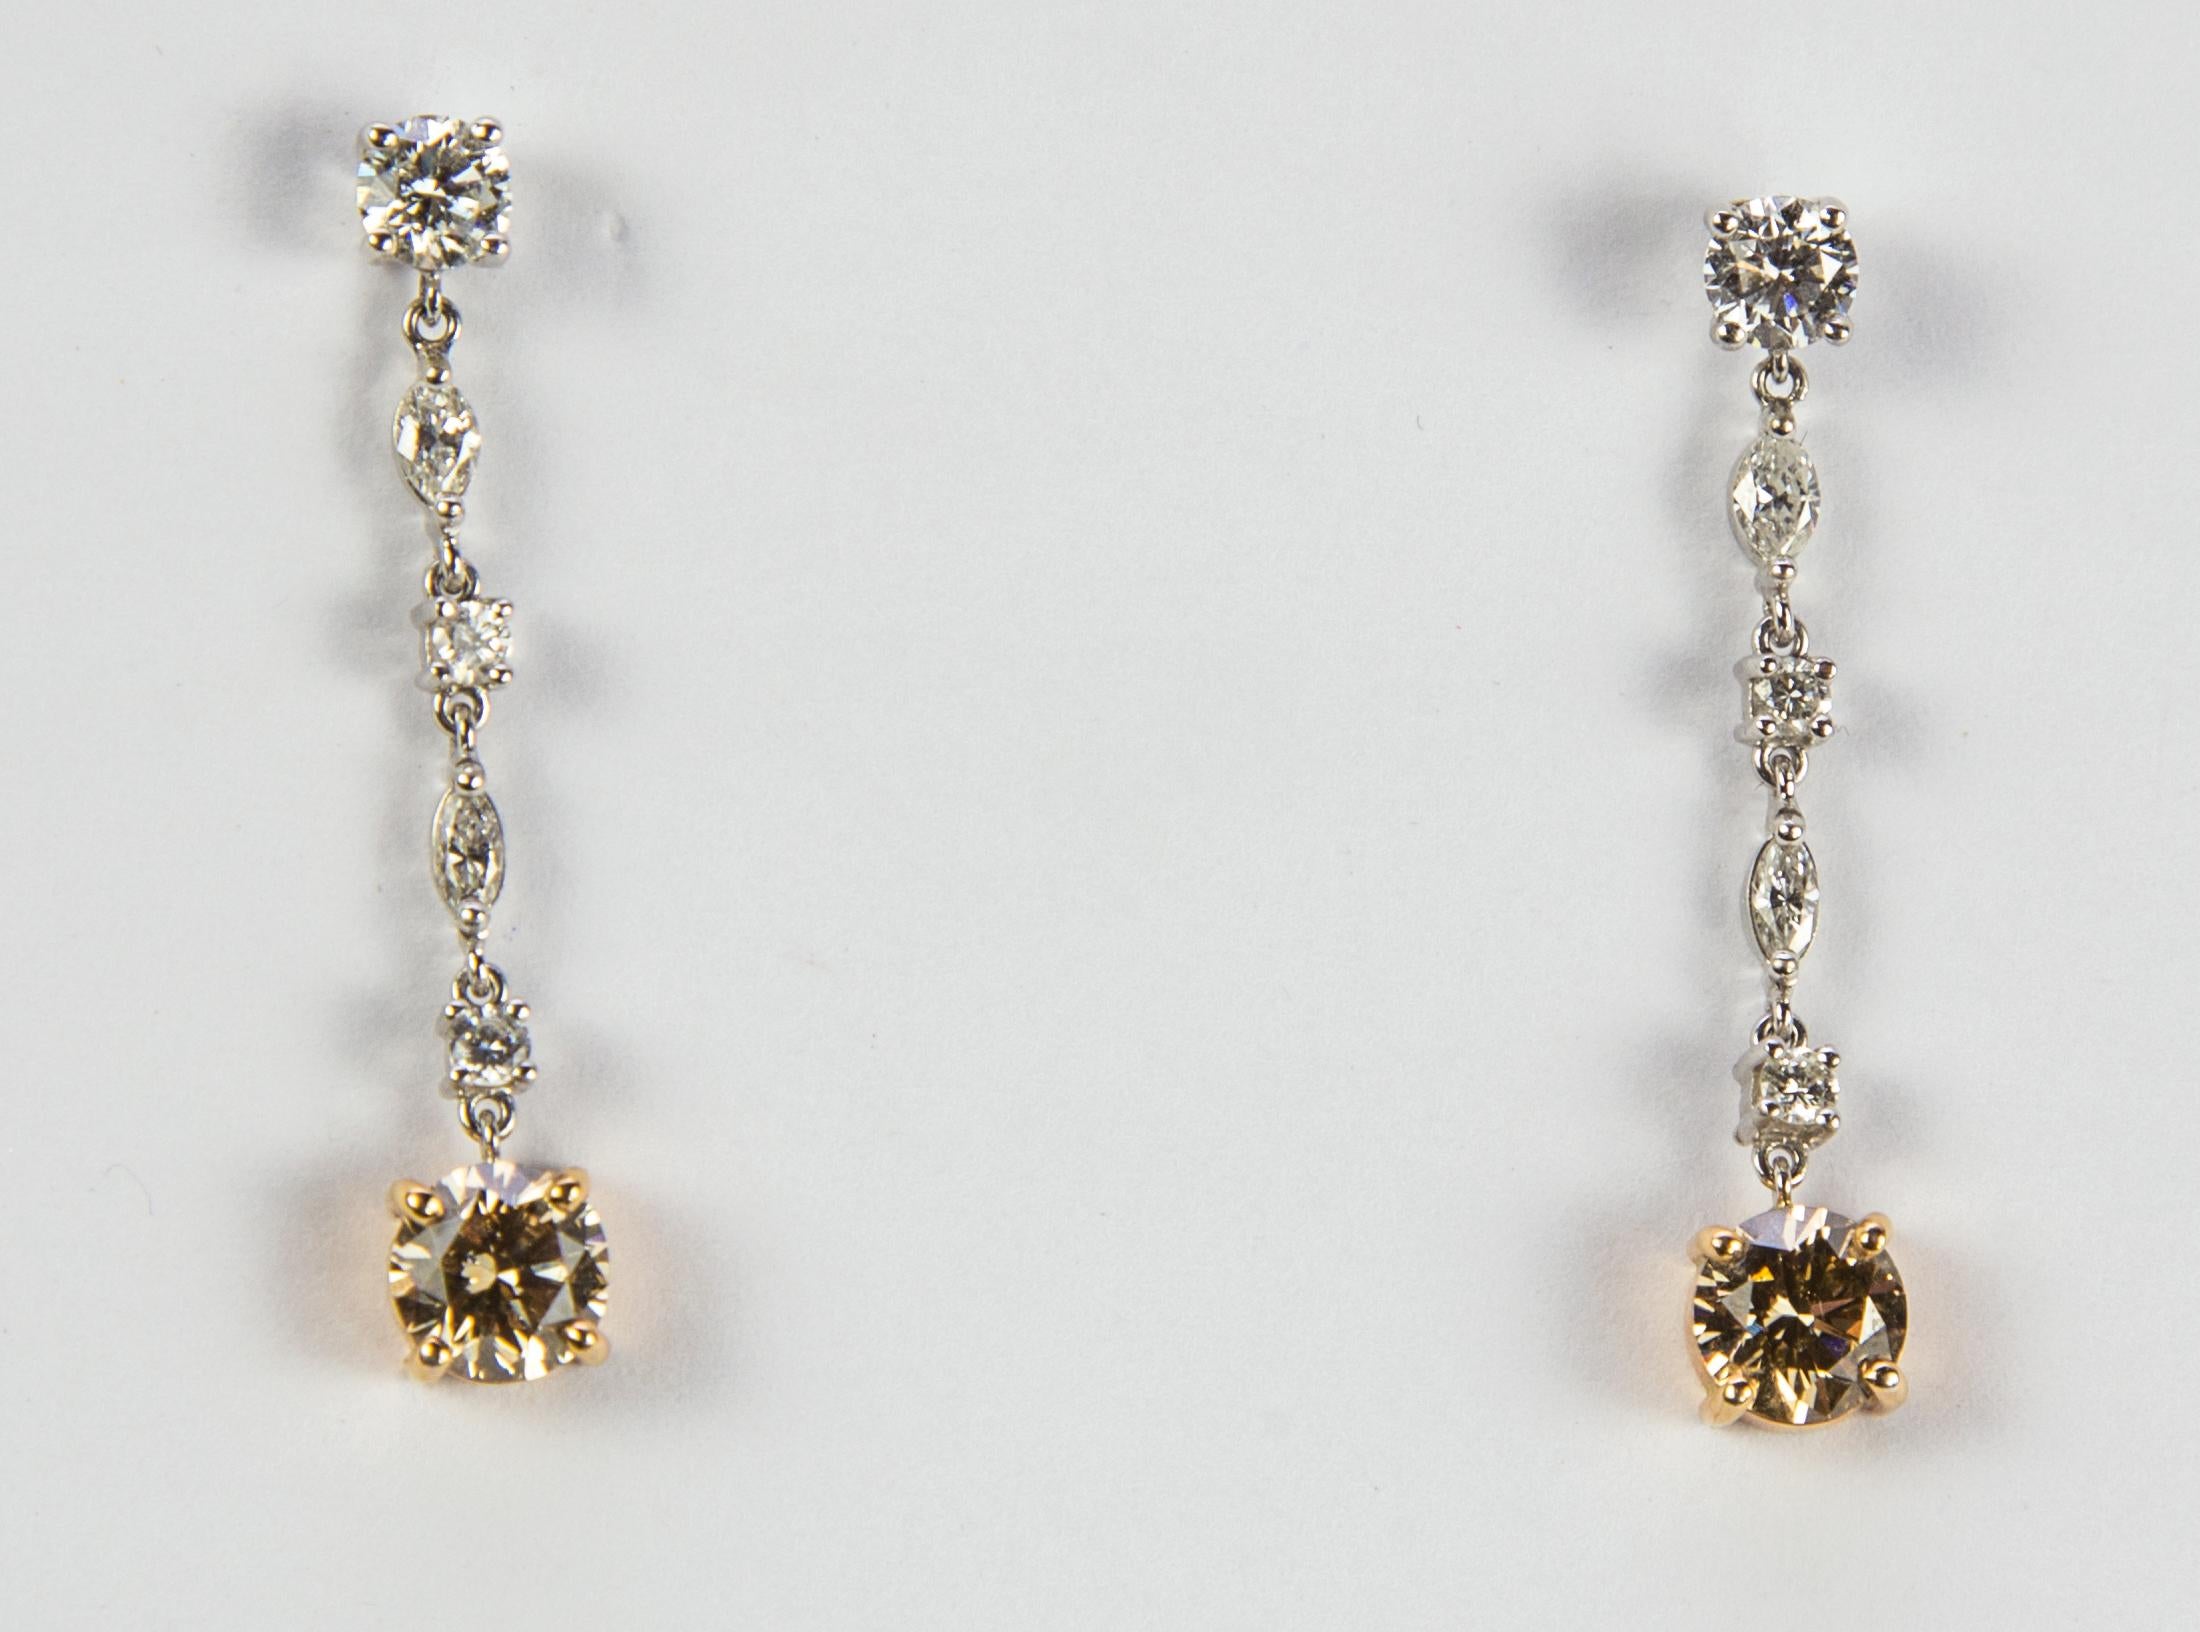 Featuring Fabulous one of a kind Diamond Earrings; hand crafted in 18K white and yellow gold, each earring set with one round brilliant-cut diamond, weighing approx. .25 carat (.50 total carat weight), suspending two marquise shaped diamonds, two